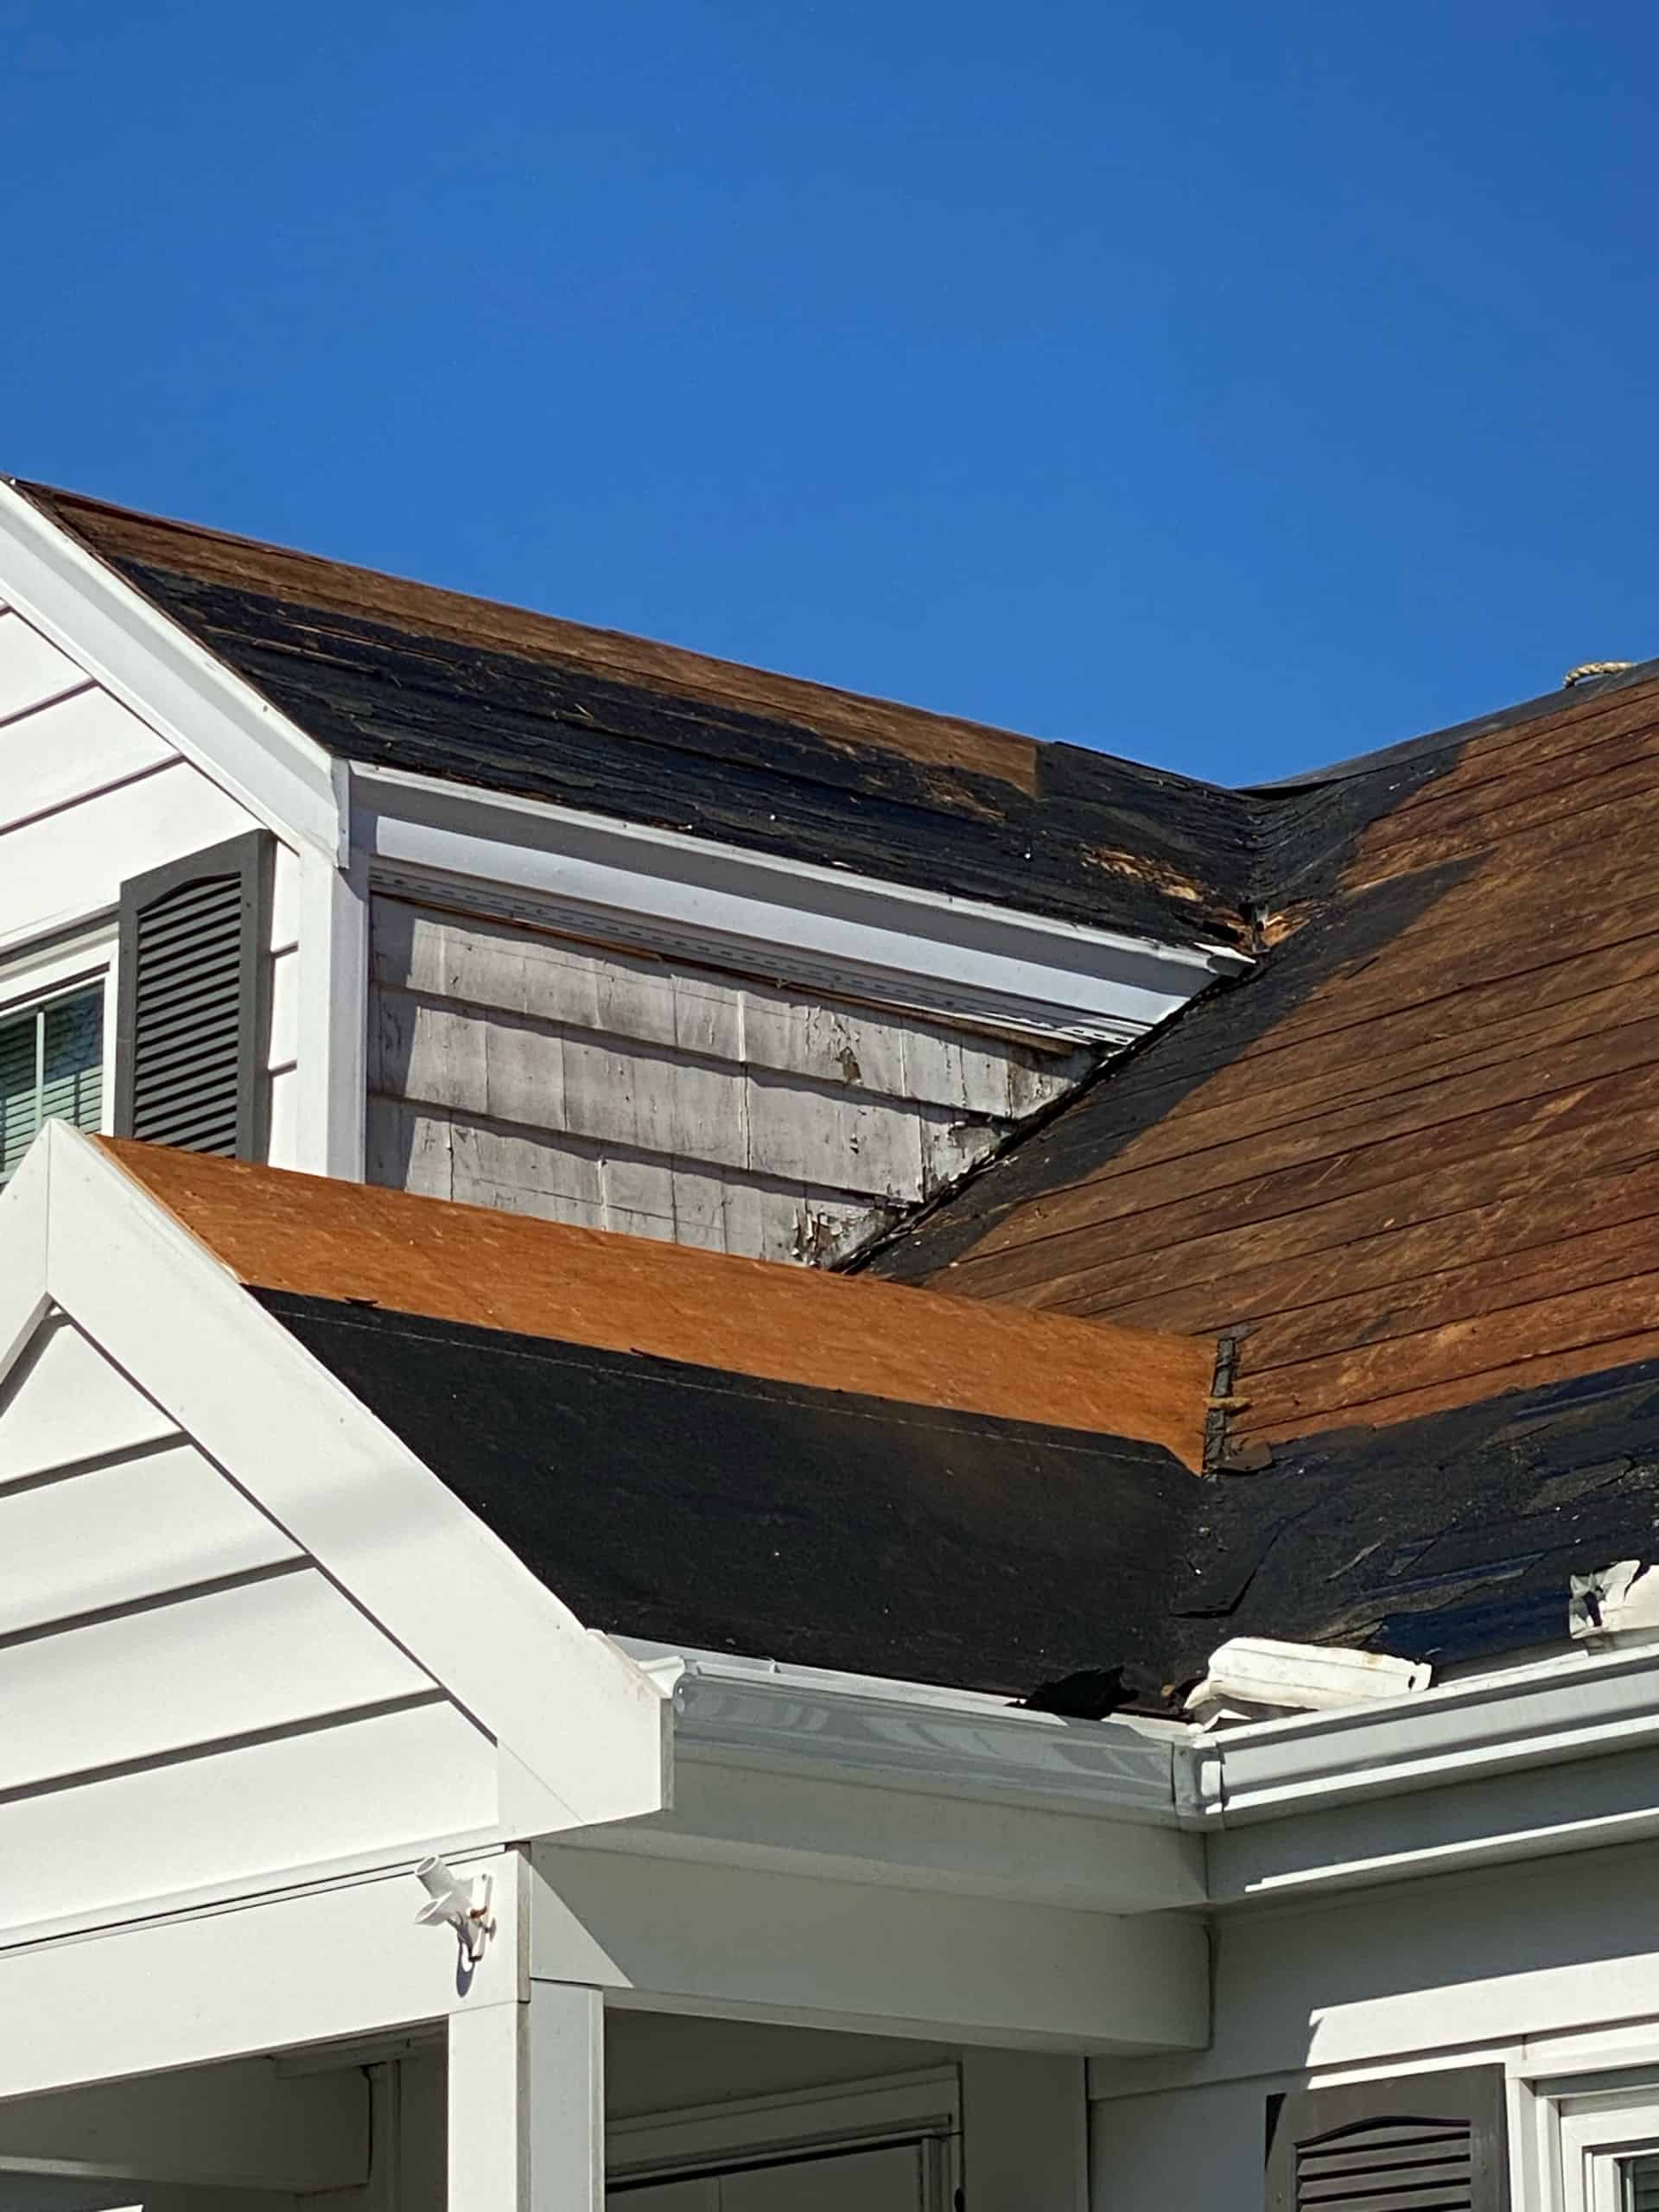 Roof rotting in the winter